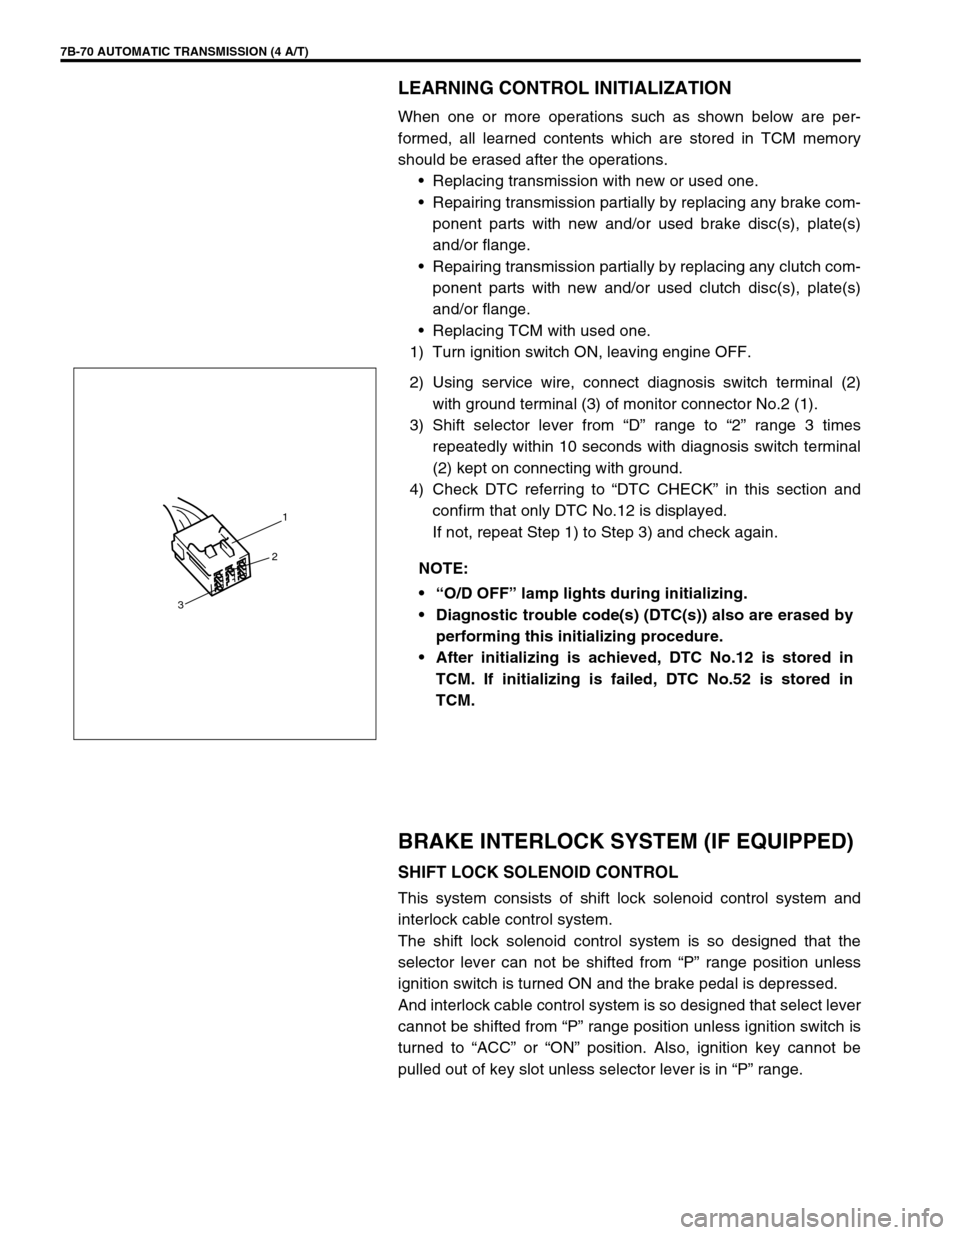 SUZUKI SWIFT 2000 1.G Transmission Service Workshop Manual 7B-70 AUTOMATIC TRANSMISSION (4 A/T)
LEARNING CONTROL INITIALIZATION
When one or more operations such as shown below are per-
formed, all learned contents which are stored in TCM memory
should be eras